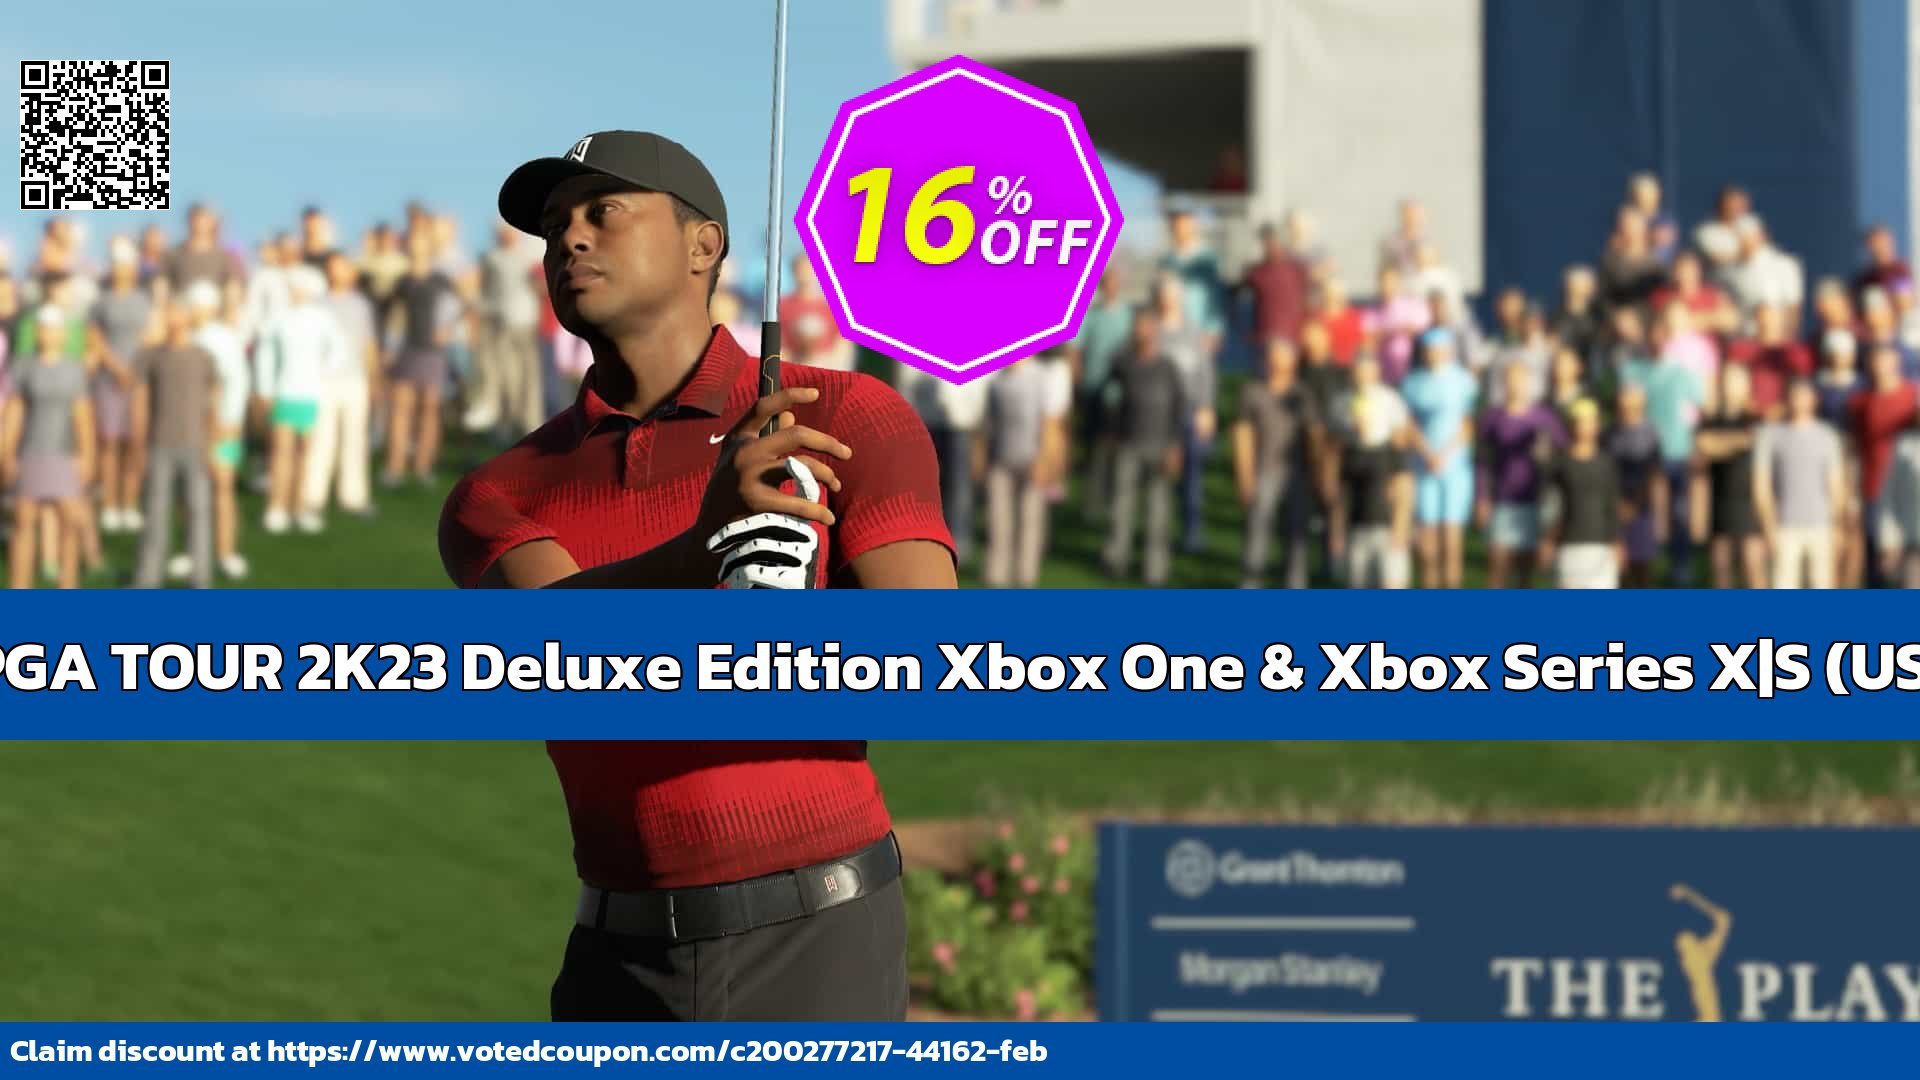 PGA TOUR 2K23 Deluxe Edition Xbox One & Xbox Series X|S, US  voted-on promotion codes